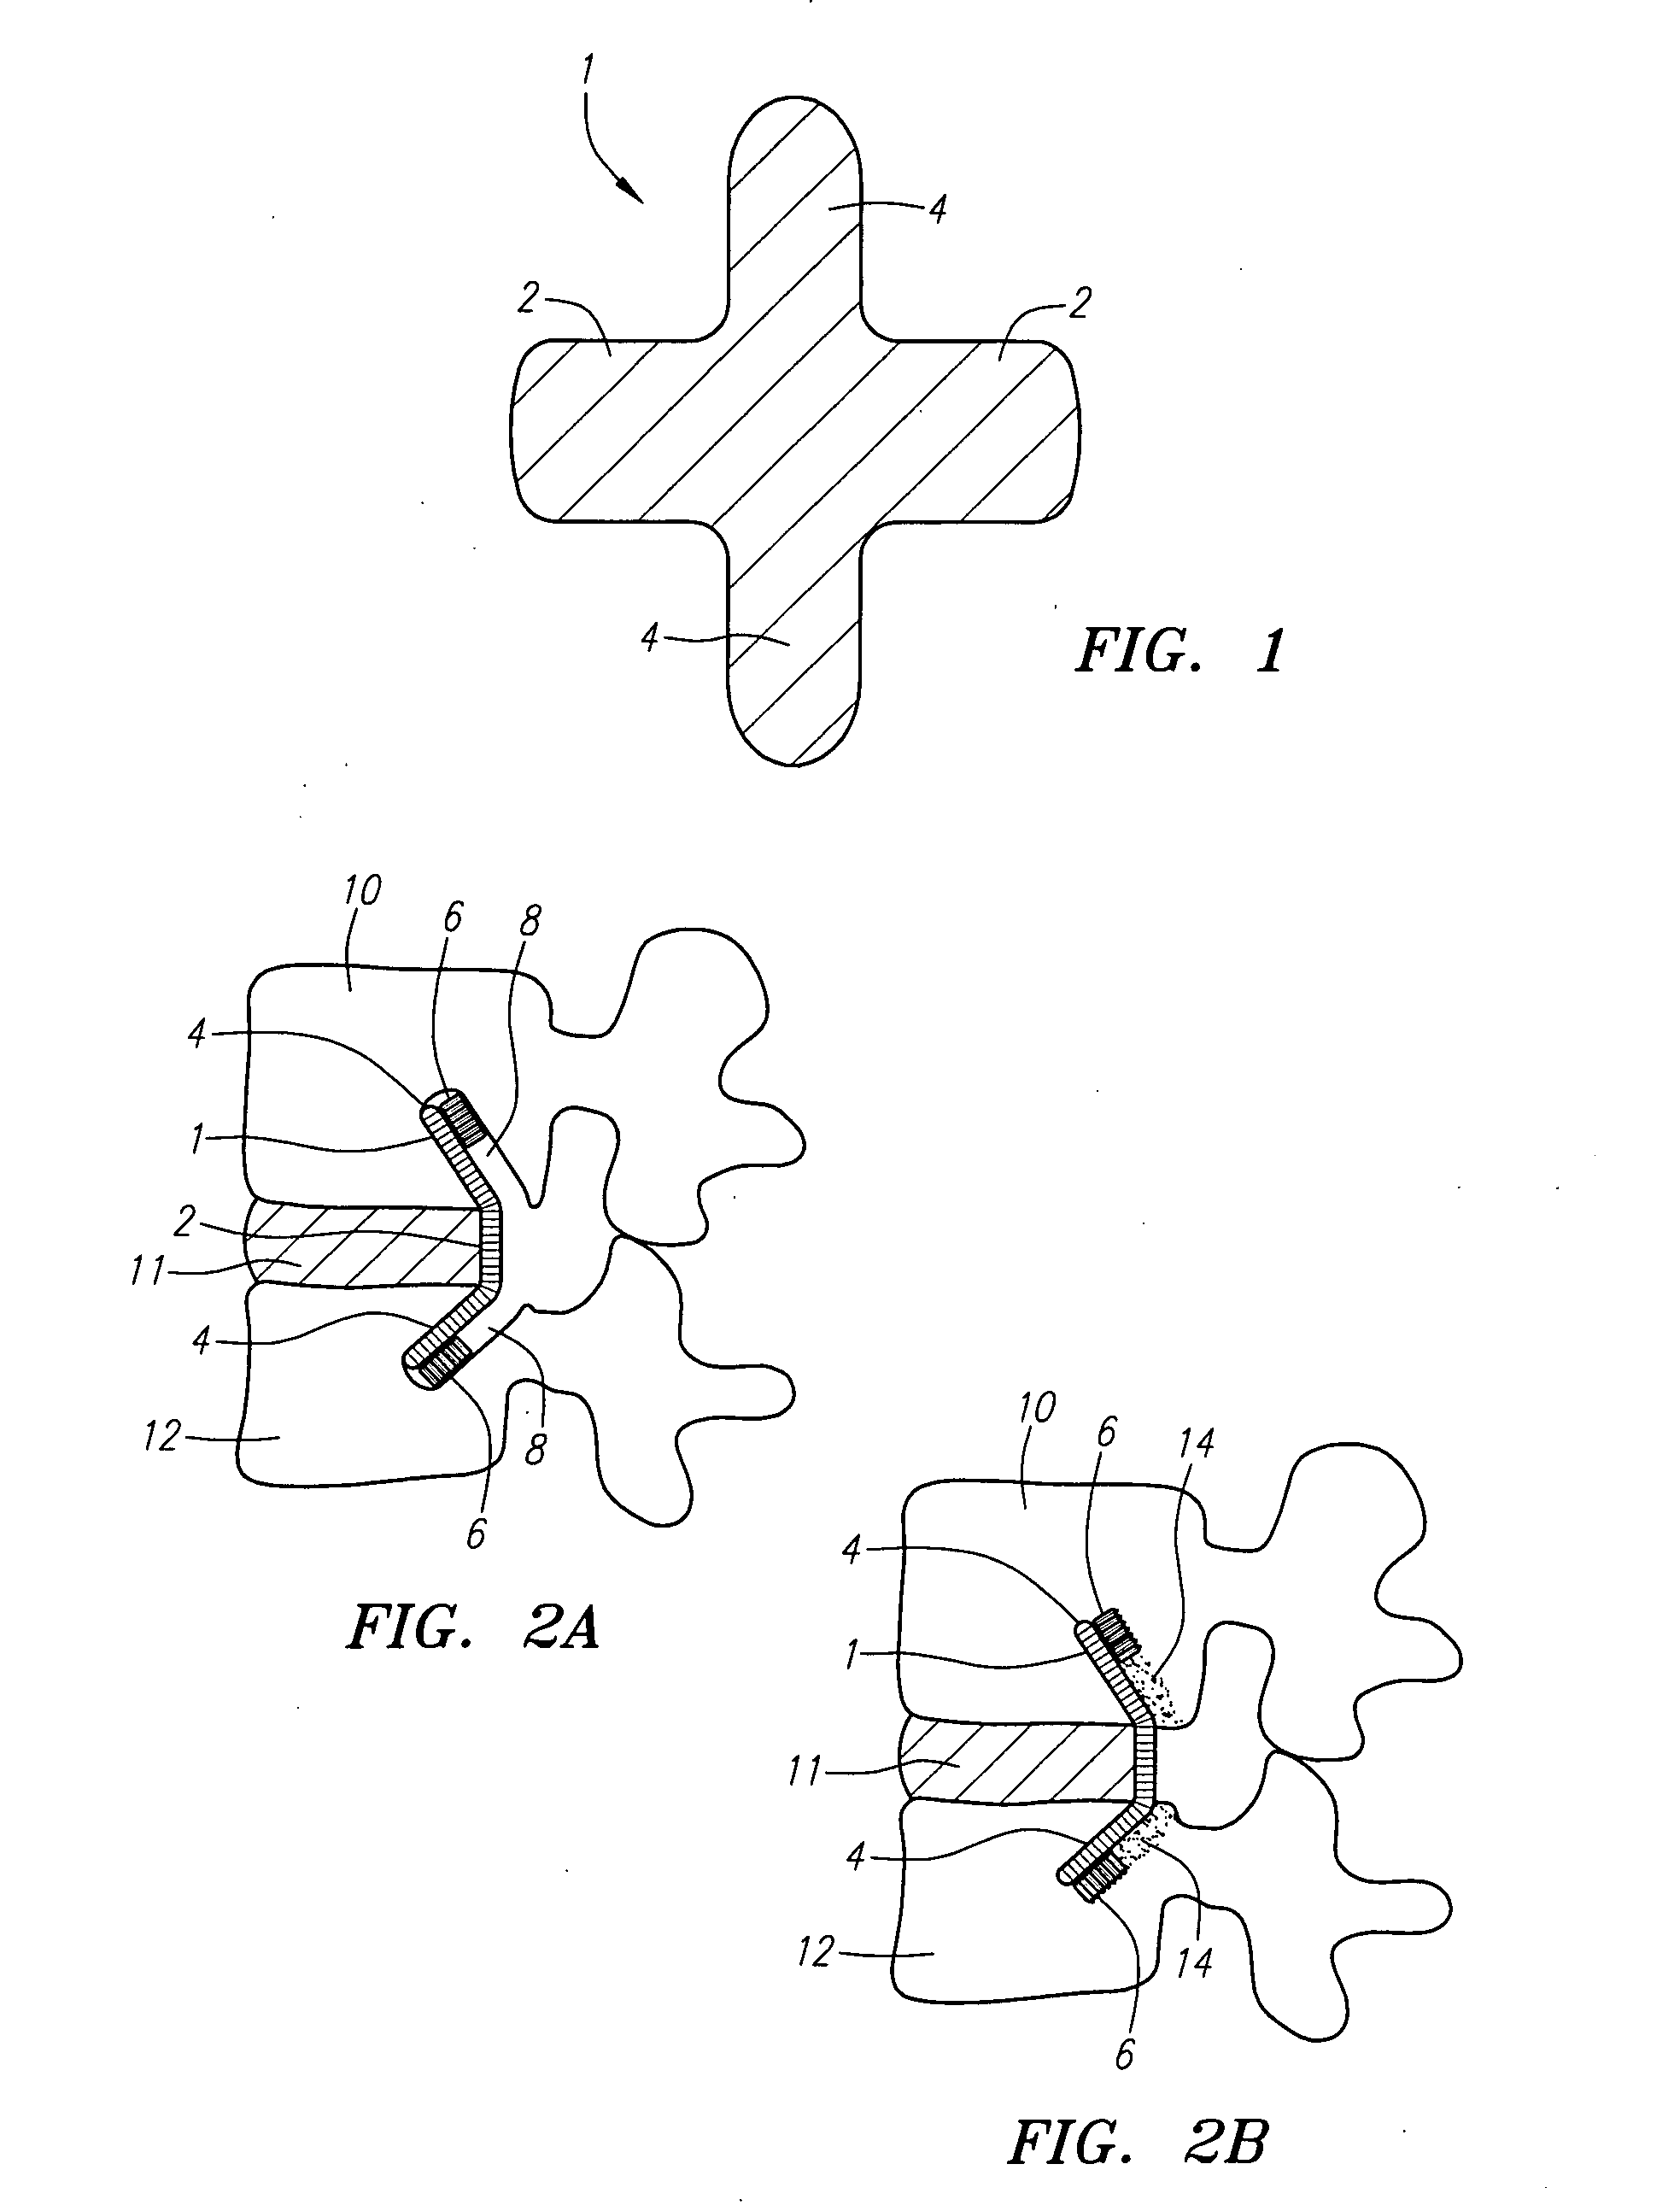 Methods and apparatus for reconstructing the annulus fibrosis